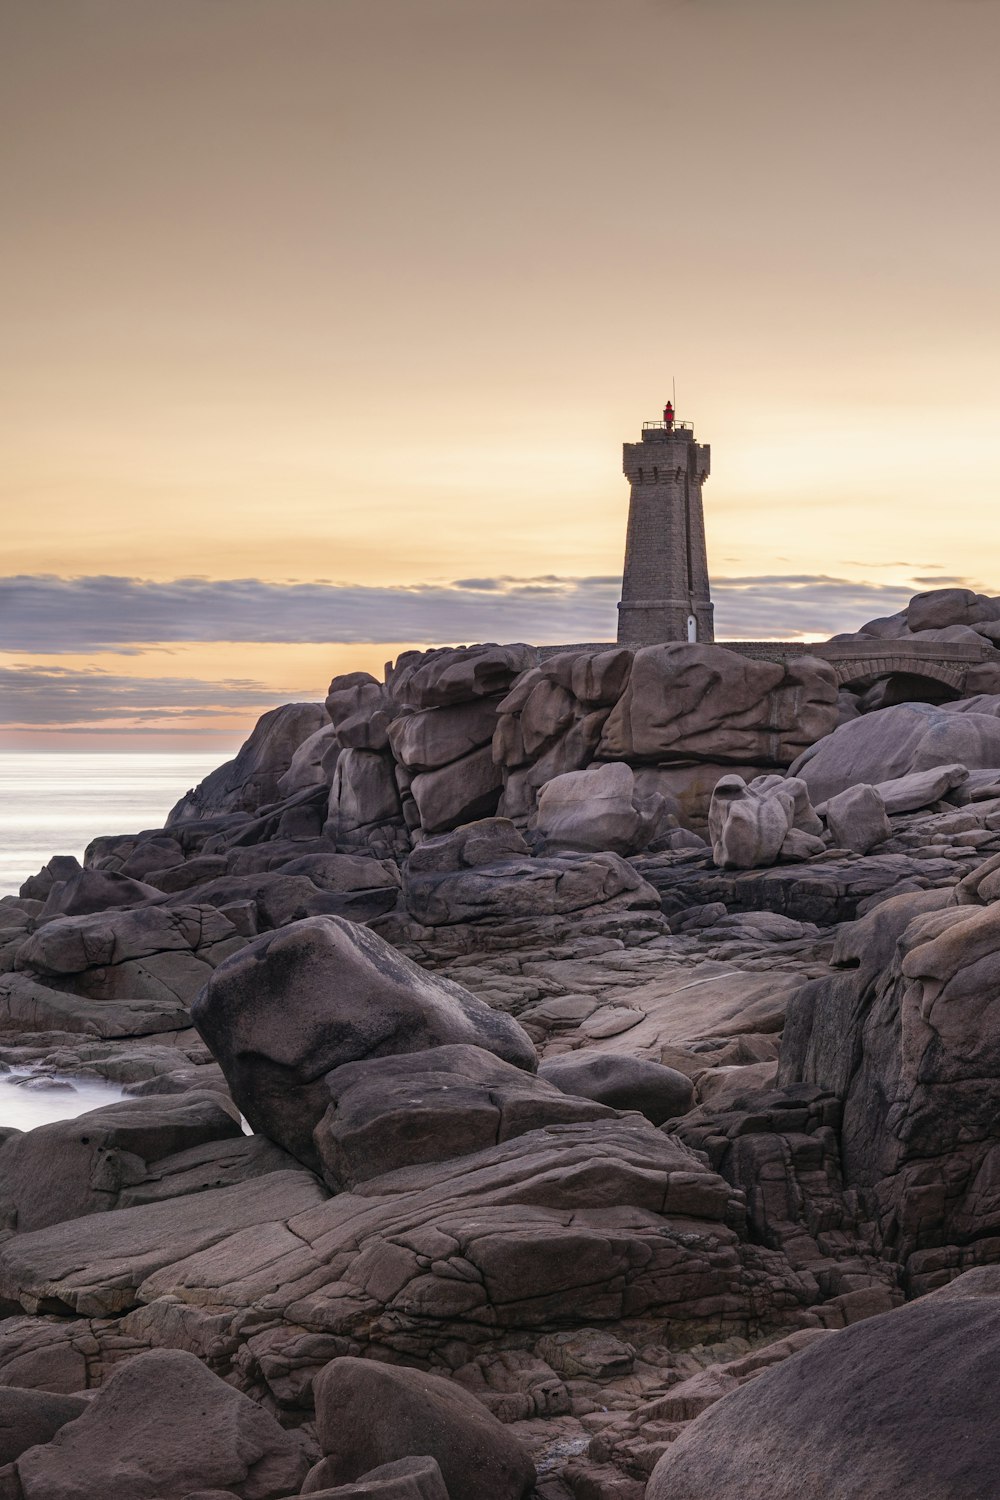 a lighthouse on a rocky shore with a body of water in the background